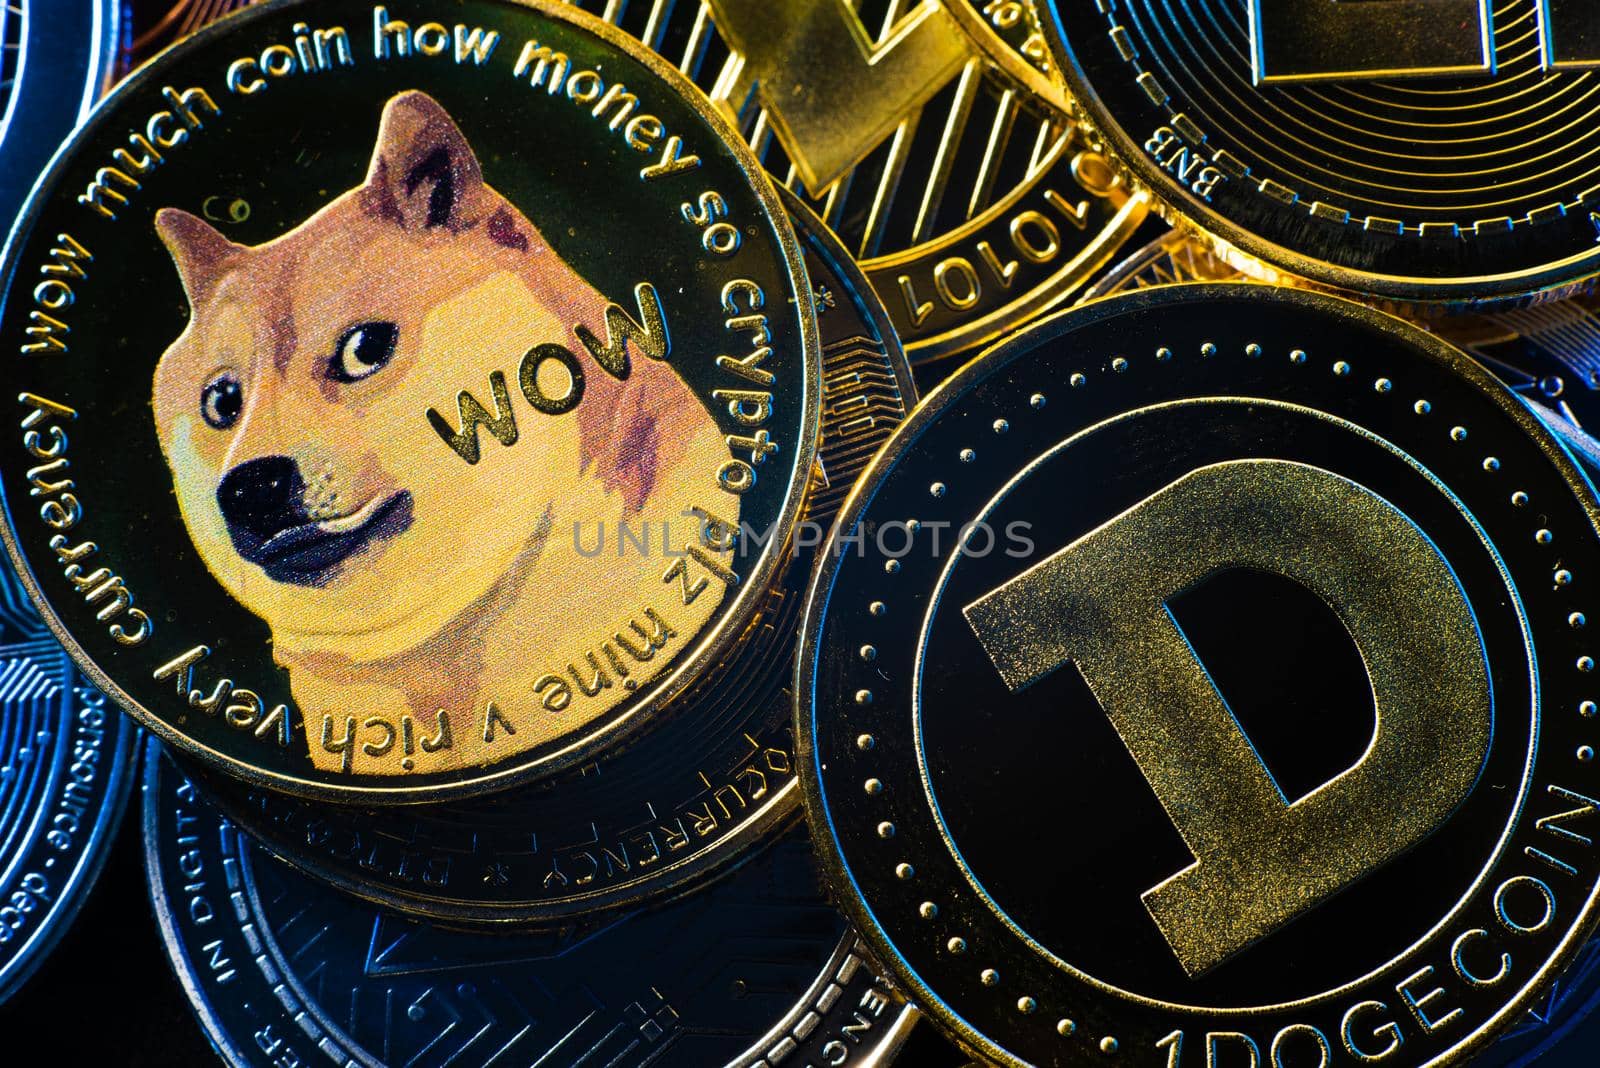 Horizontal view of cryptocurrency tokens, including Bitcoin, dogecoin, and ethererum seen from above on a black background by avirozen